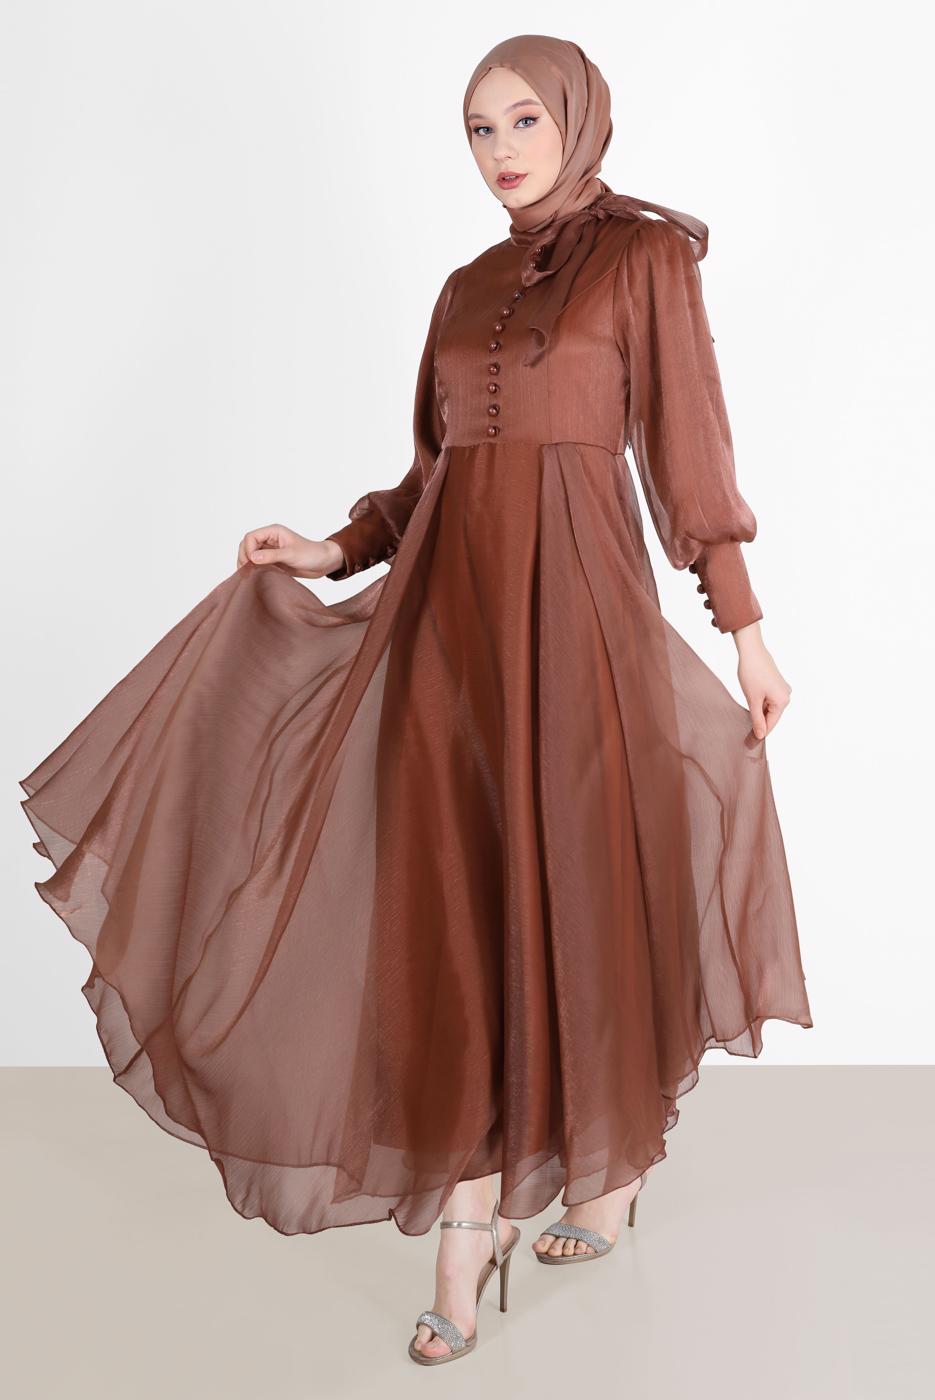 Female COFFEE BUTTON DETAIL TULLE EVENING DRESS 12825 